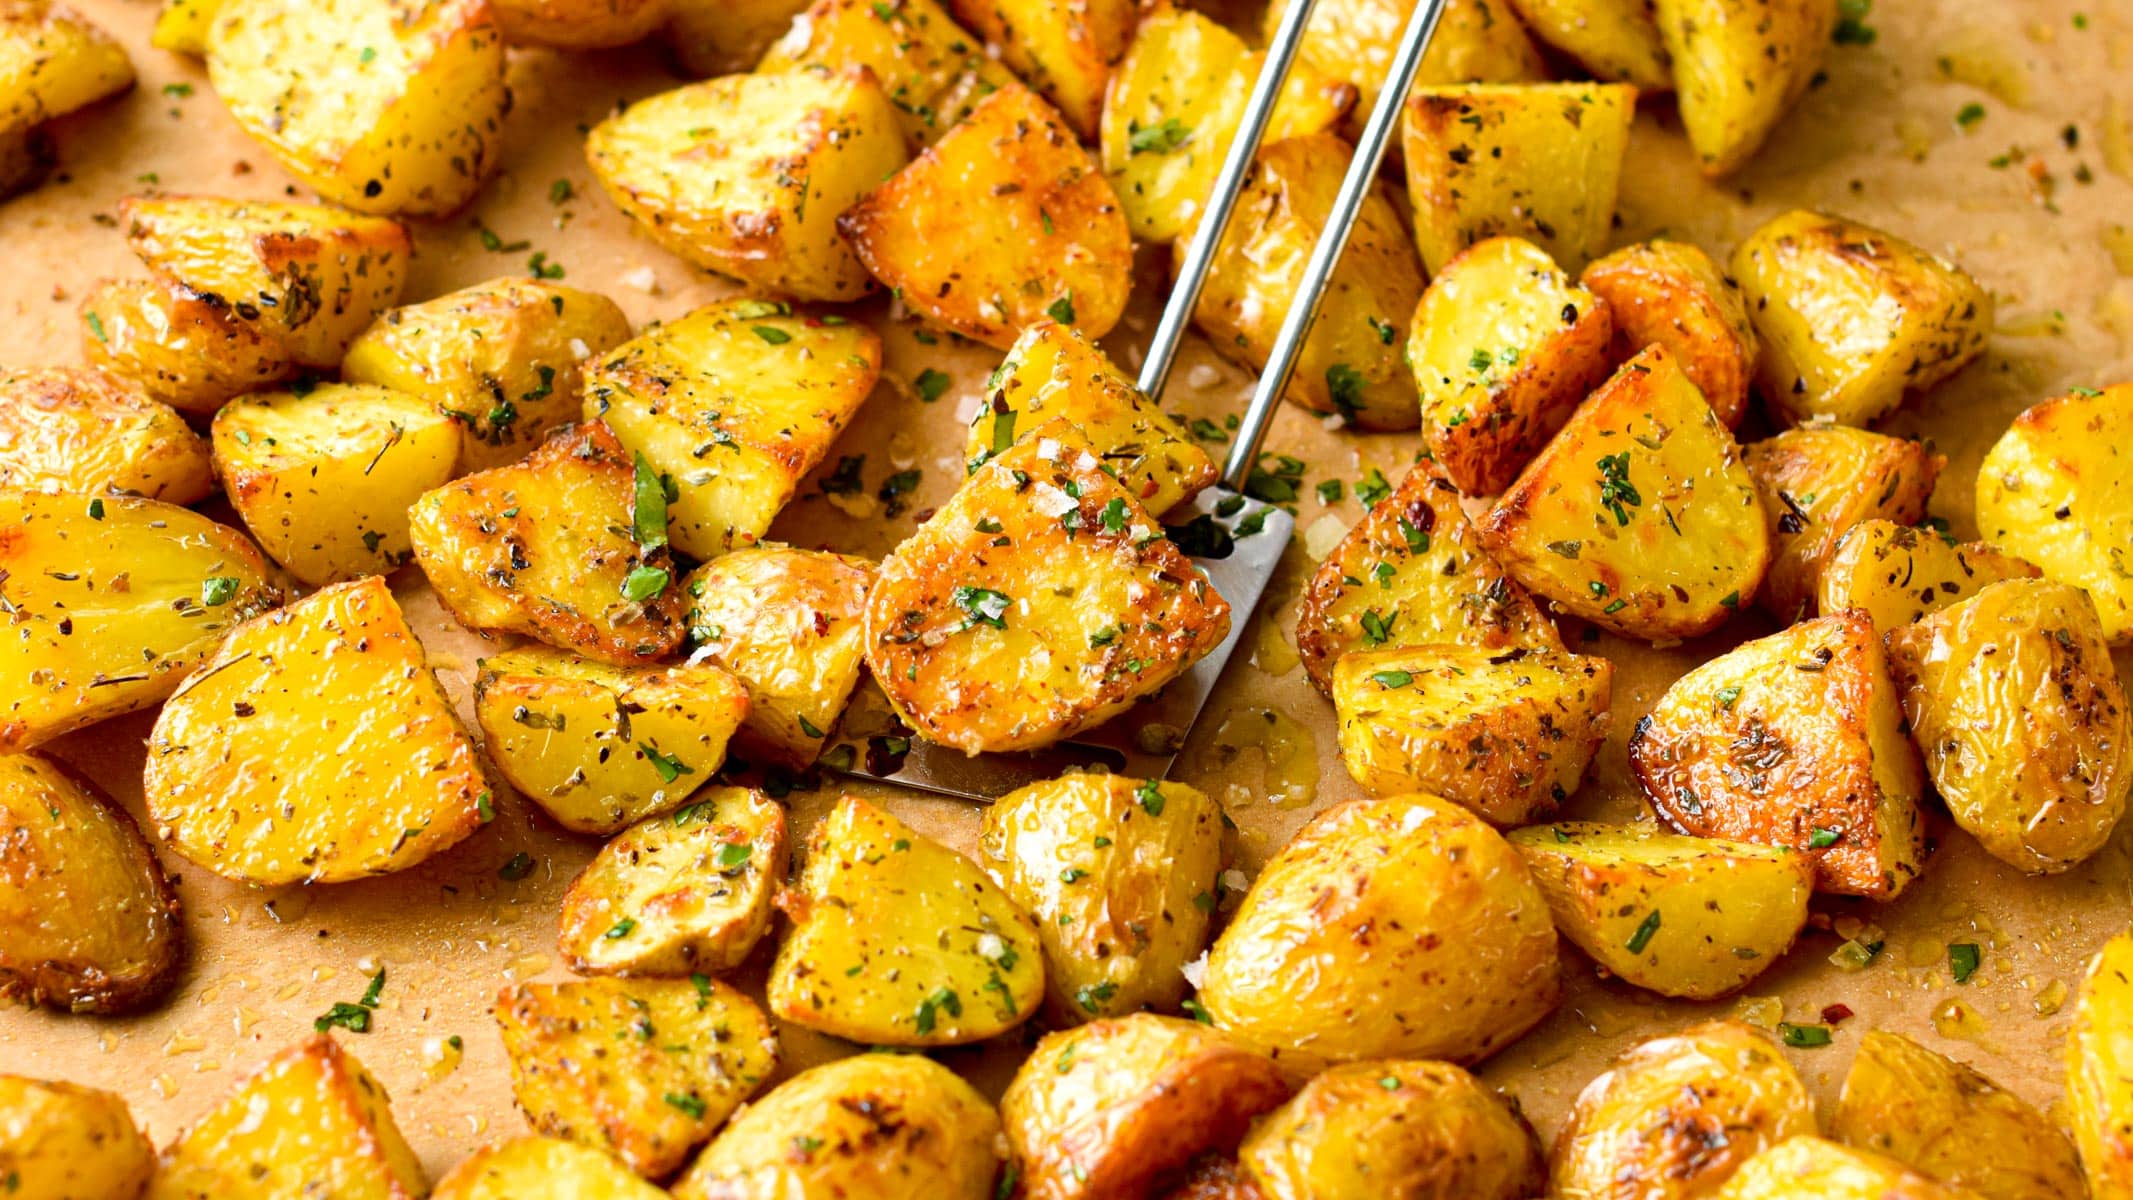 These Oven Roasted Potatoes are the most easy potato side dish ever ready in less than 40 minutes. Plus, this  is an allergy friendly side dish that tick all the dietary restriction as it's vegan, egg-free, nut-free and low-carb option provided.